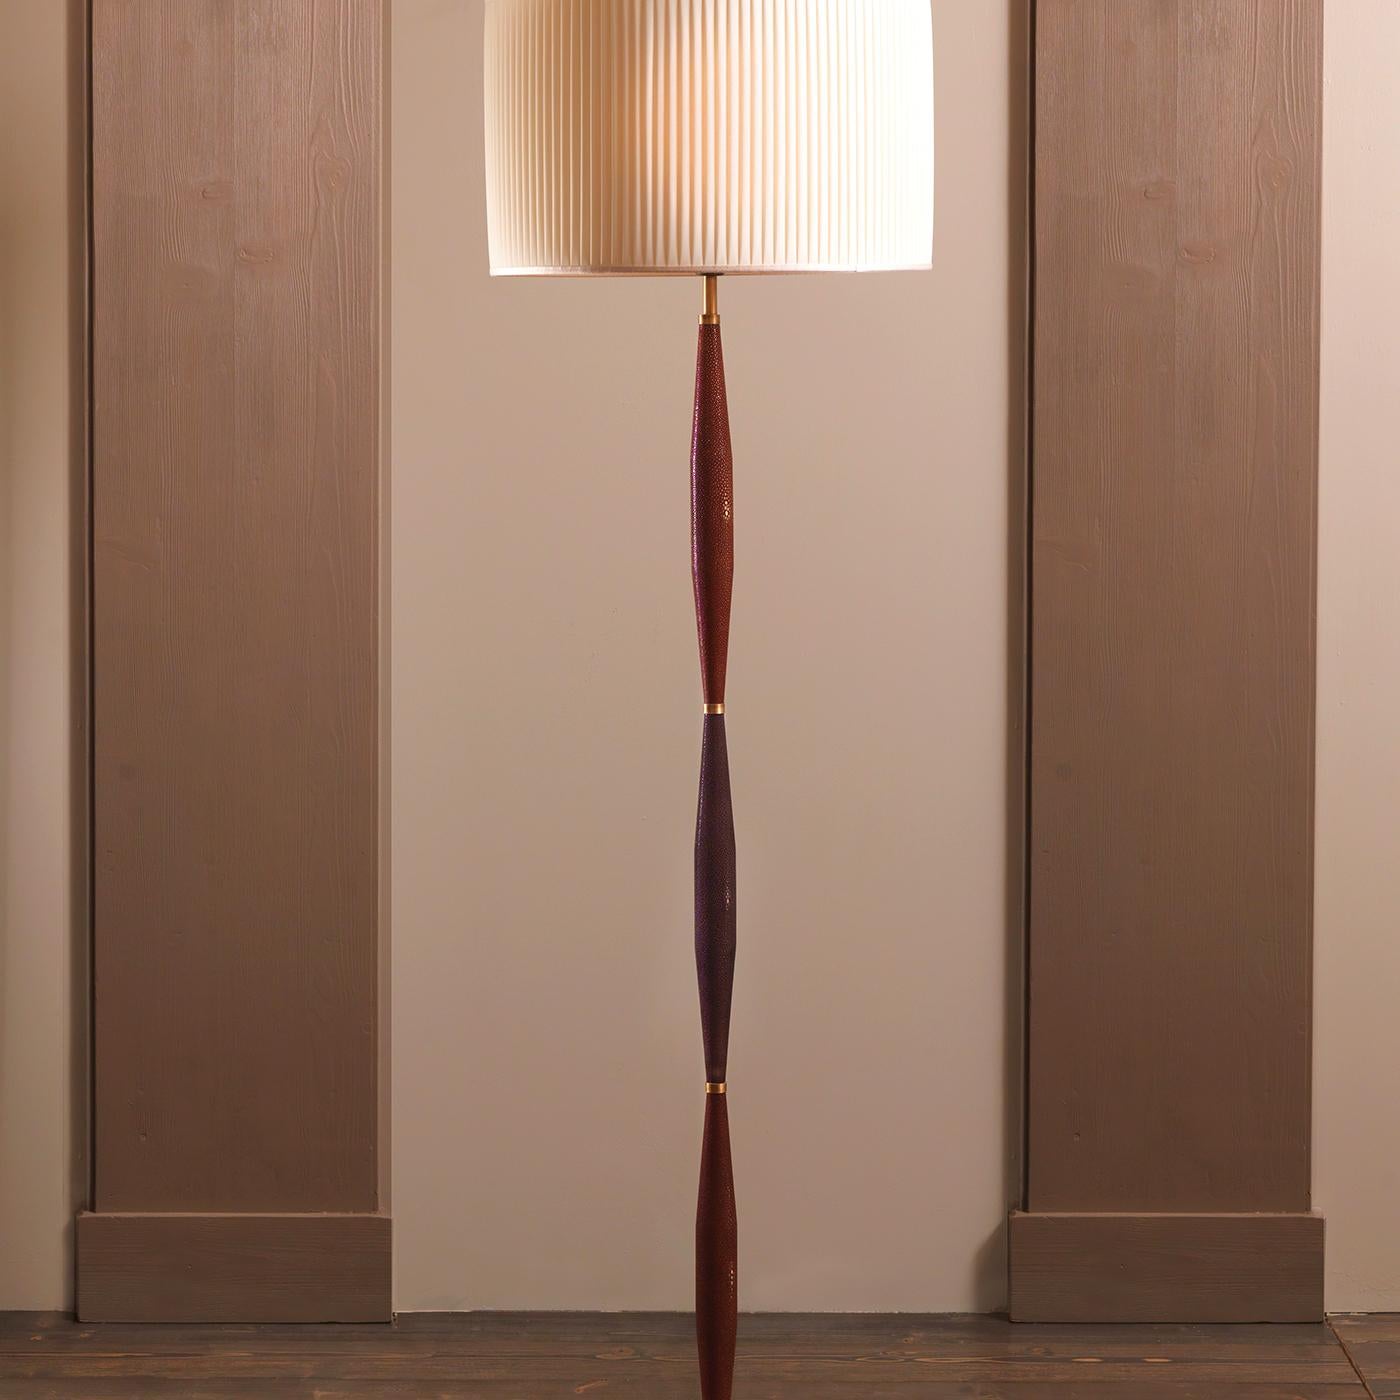 Designed by Ciarmoli Queda Studio, this sophisticated floor lamp is an exercise in timeless elegance. The stem is made of double-tapered elements upholstered in stingray skin and marked at top and bottom with brass accents. It rests on a marble